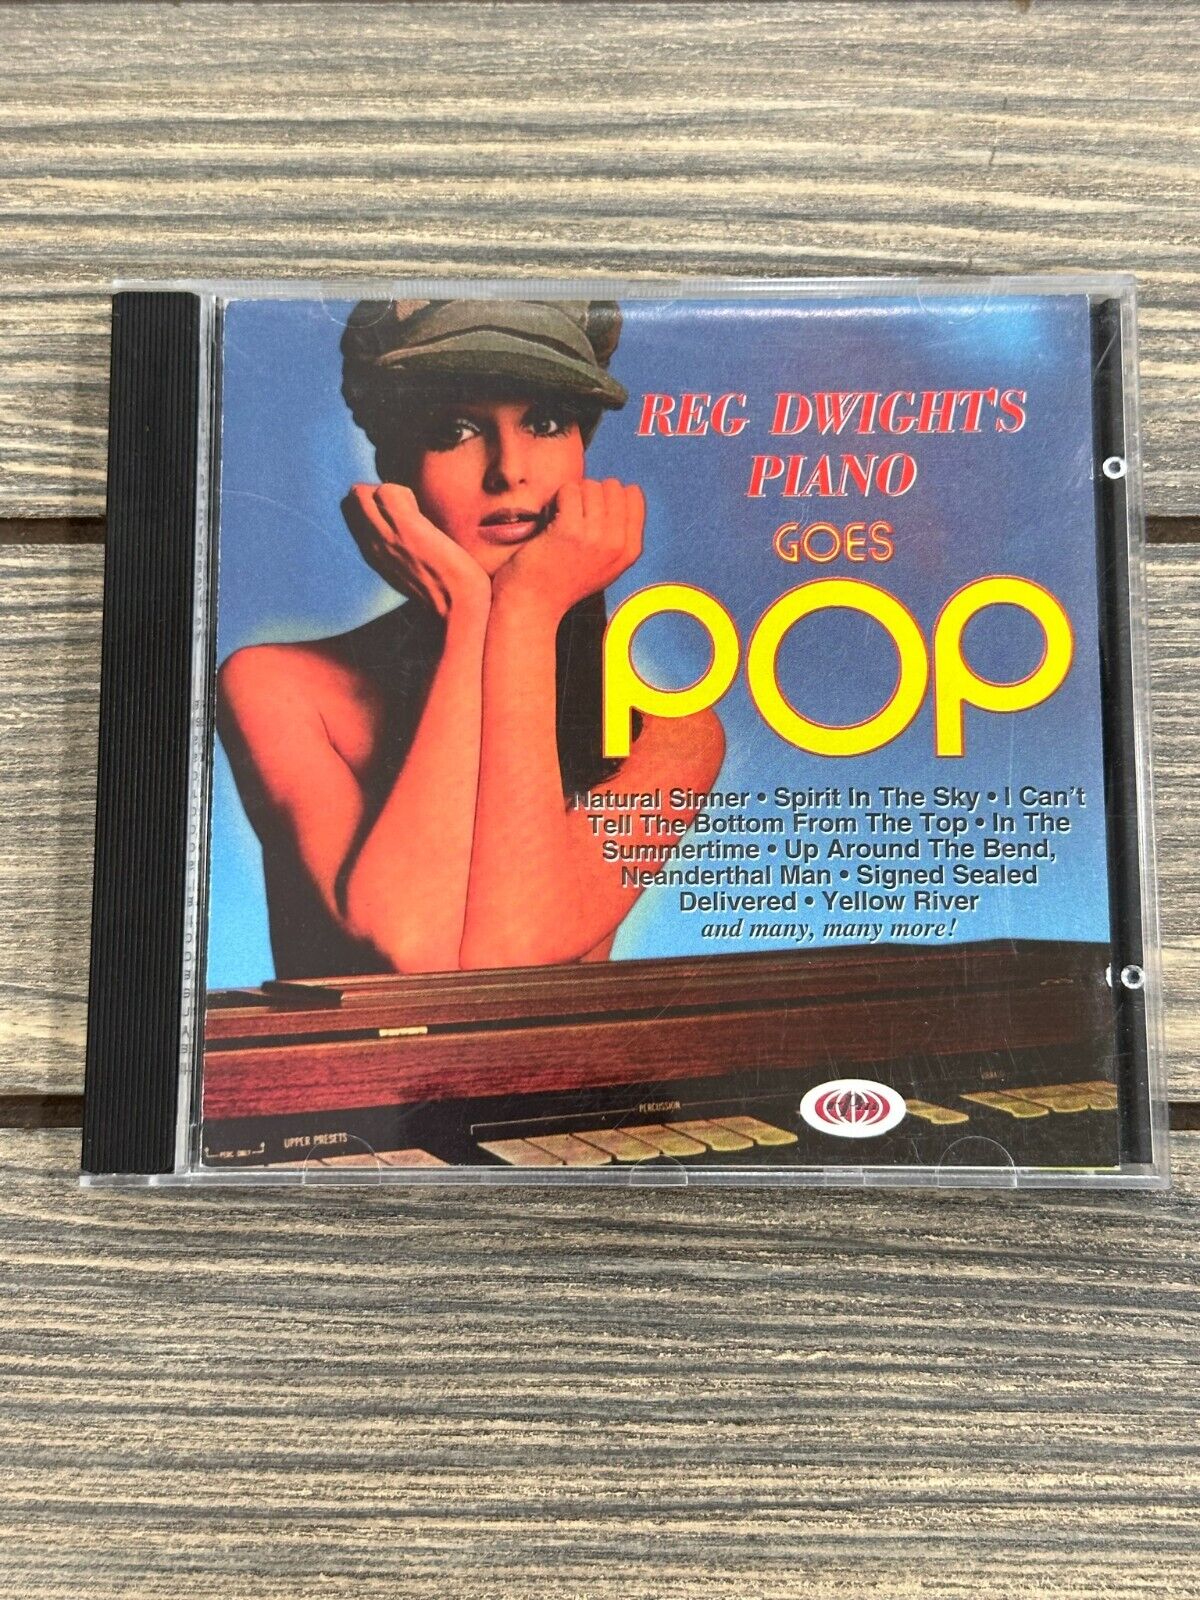 Vintage Reg Dwights Piano Goes Pop CD rPm International Made in England 1994